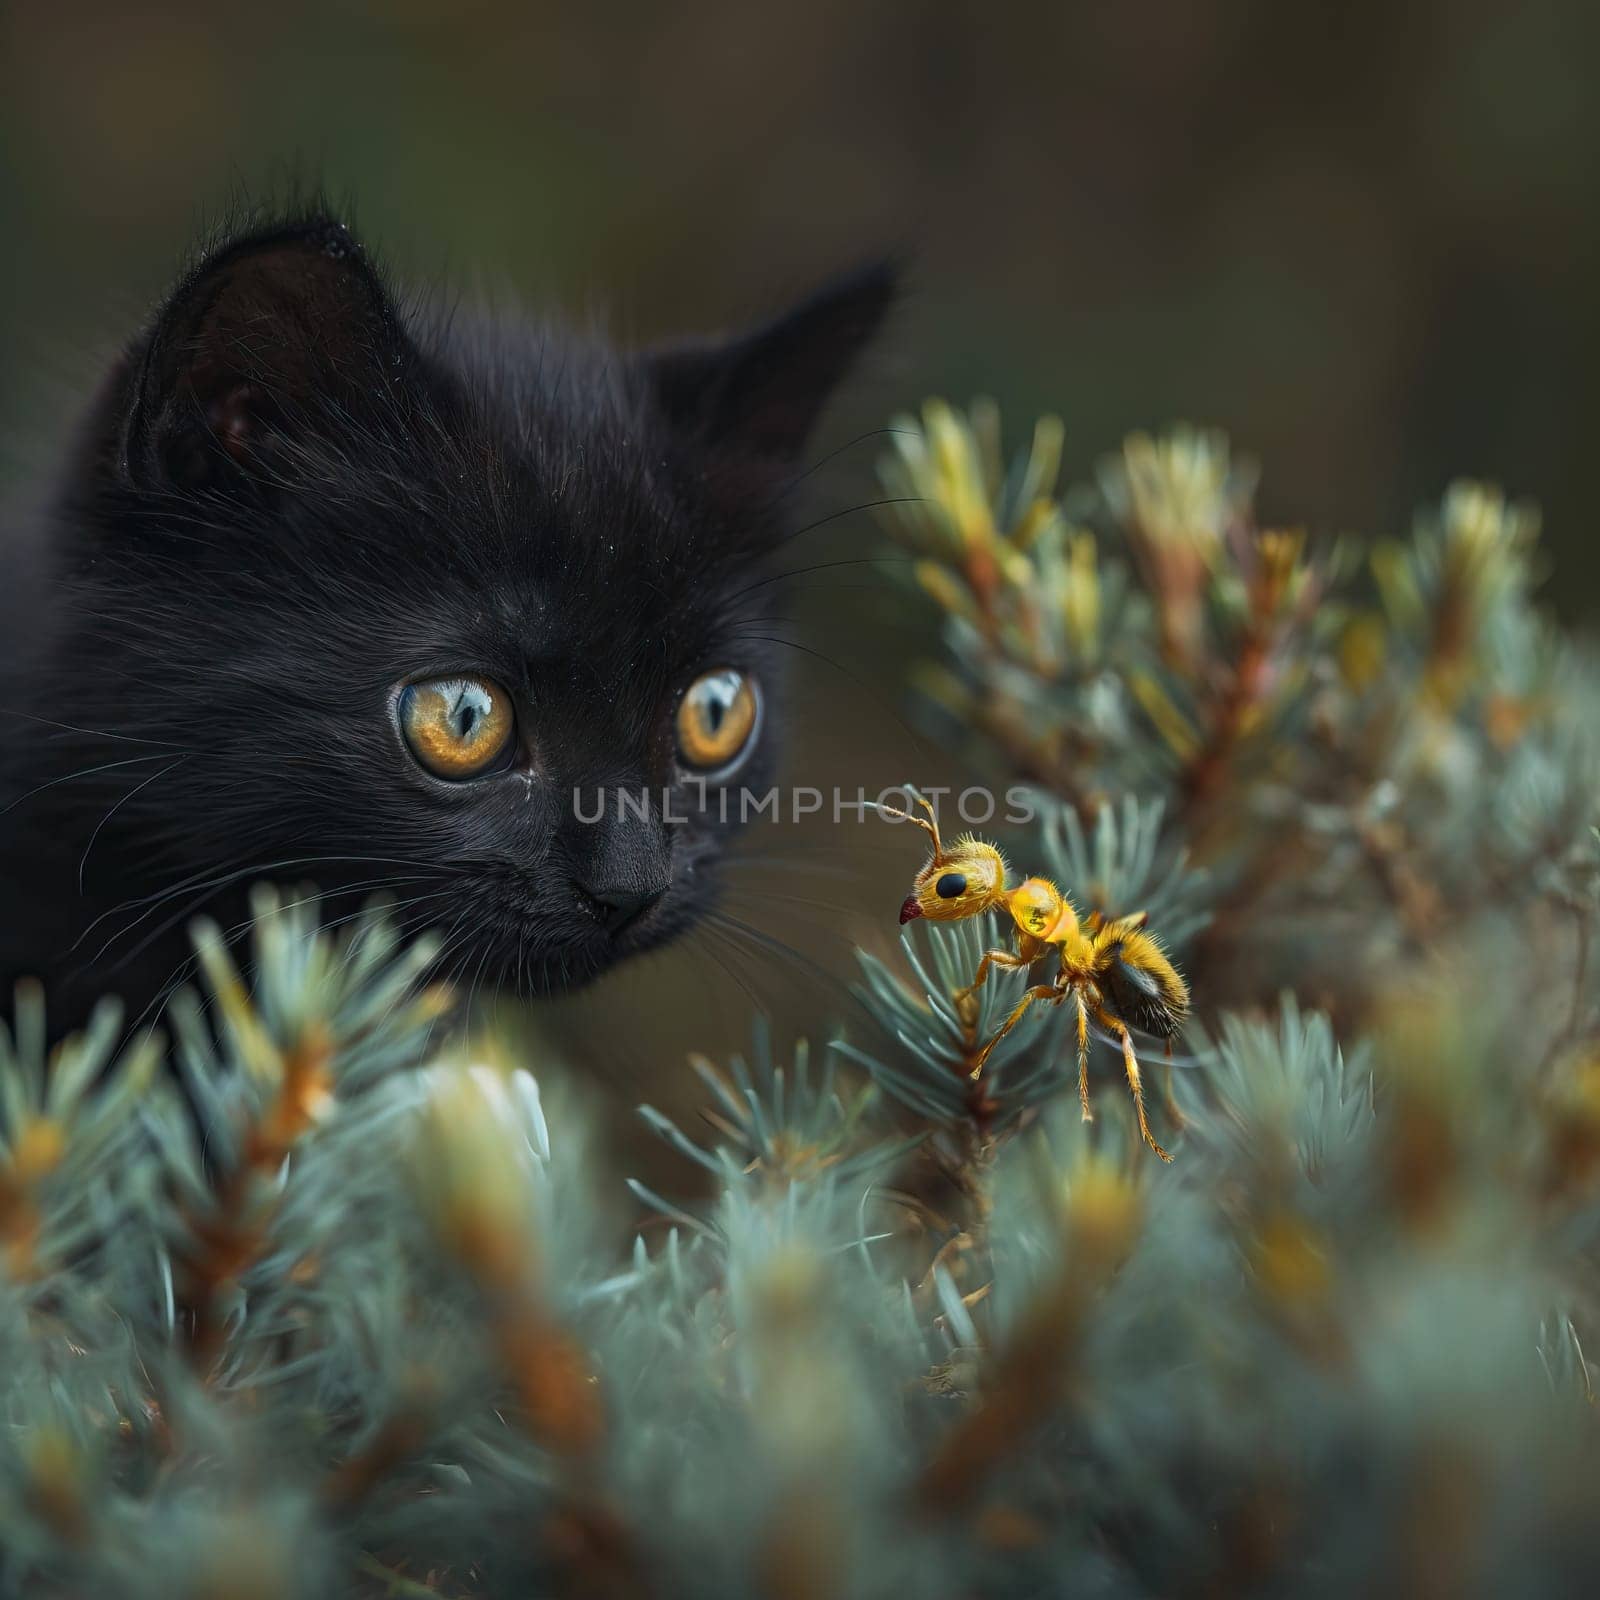 Black cat curiously watches yellow bug.